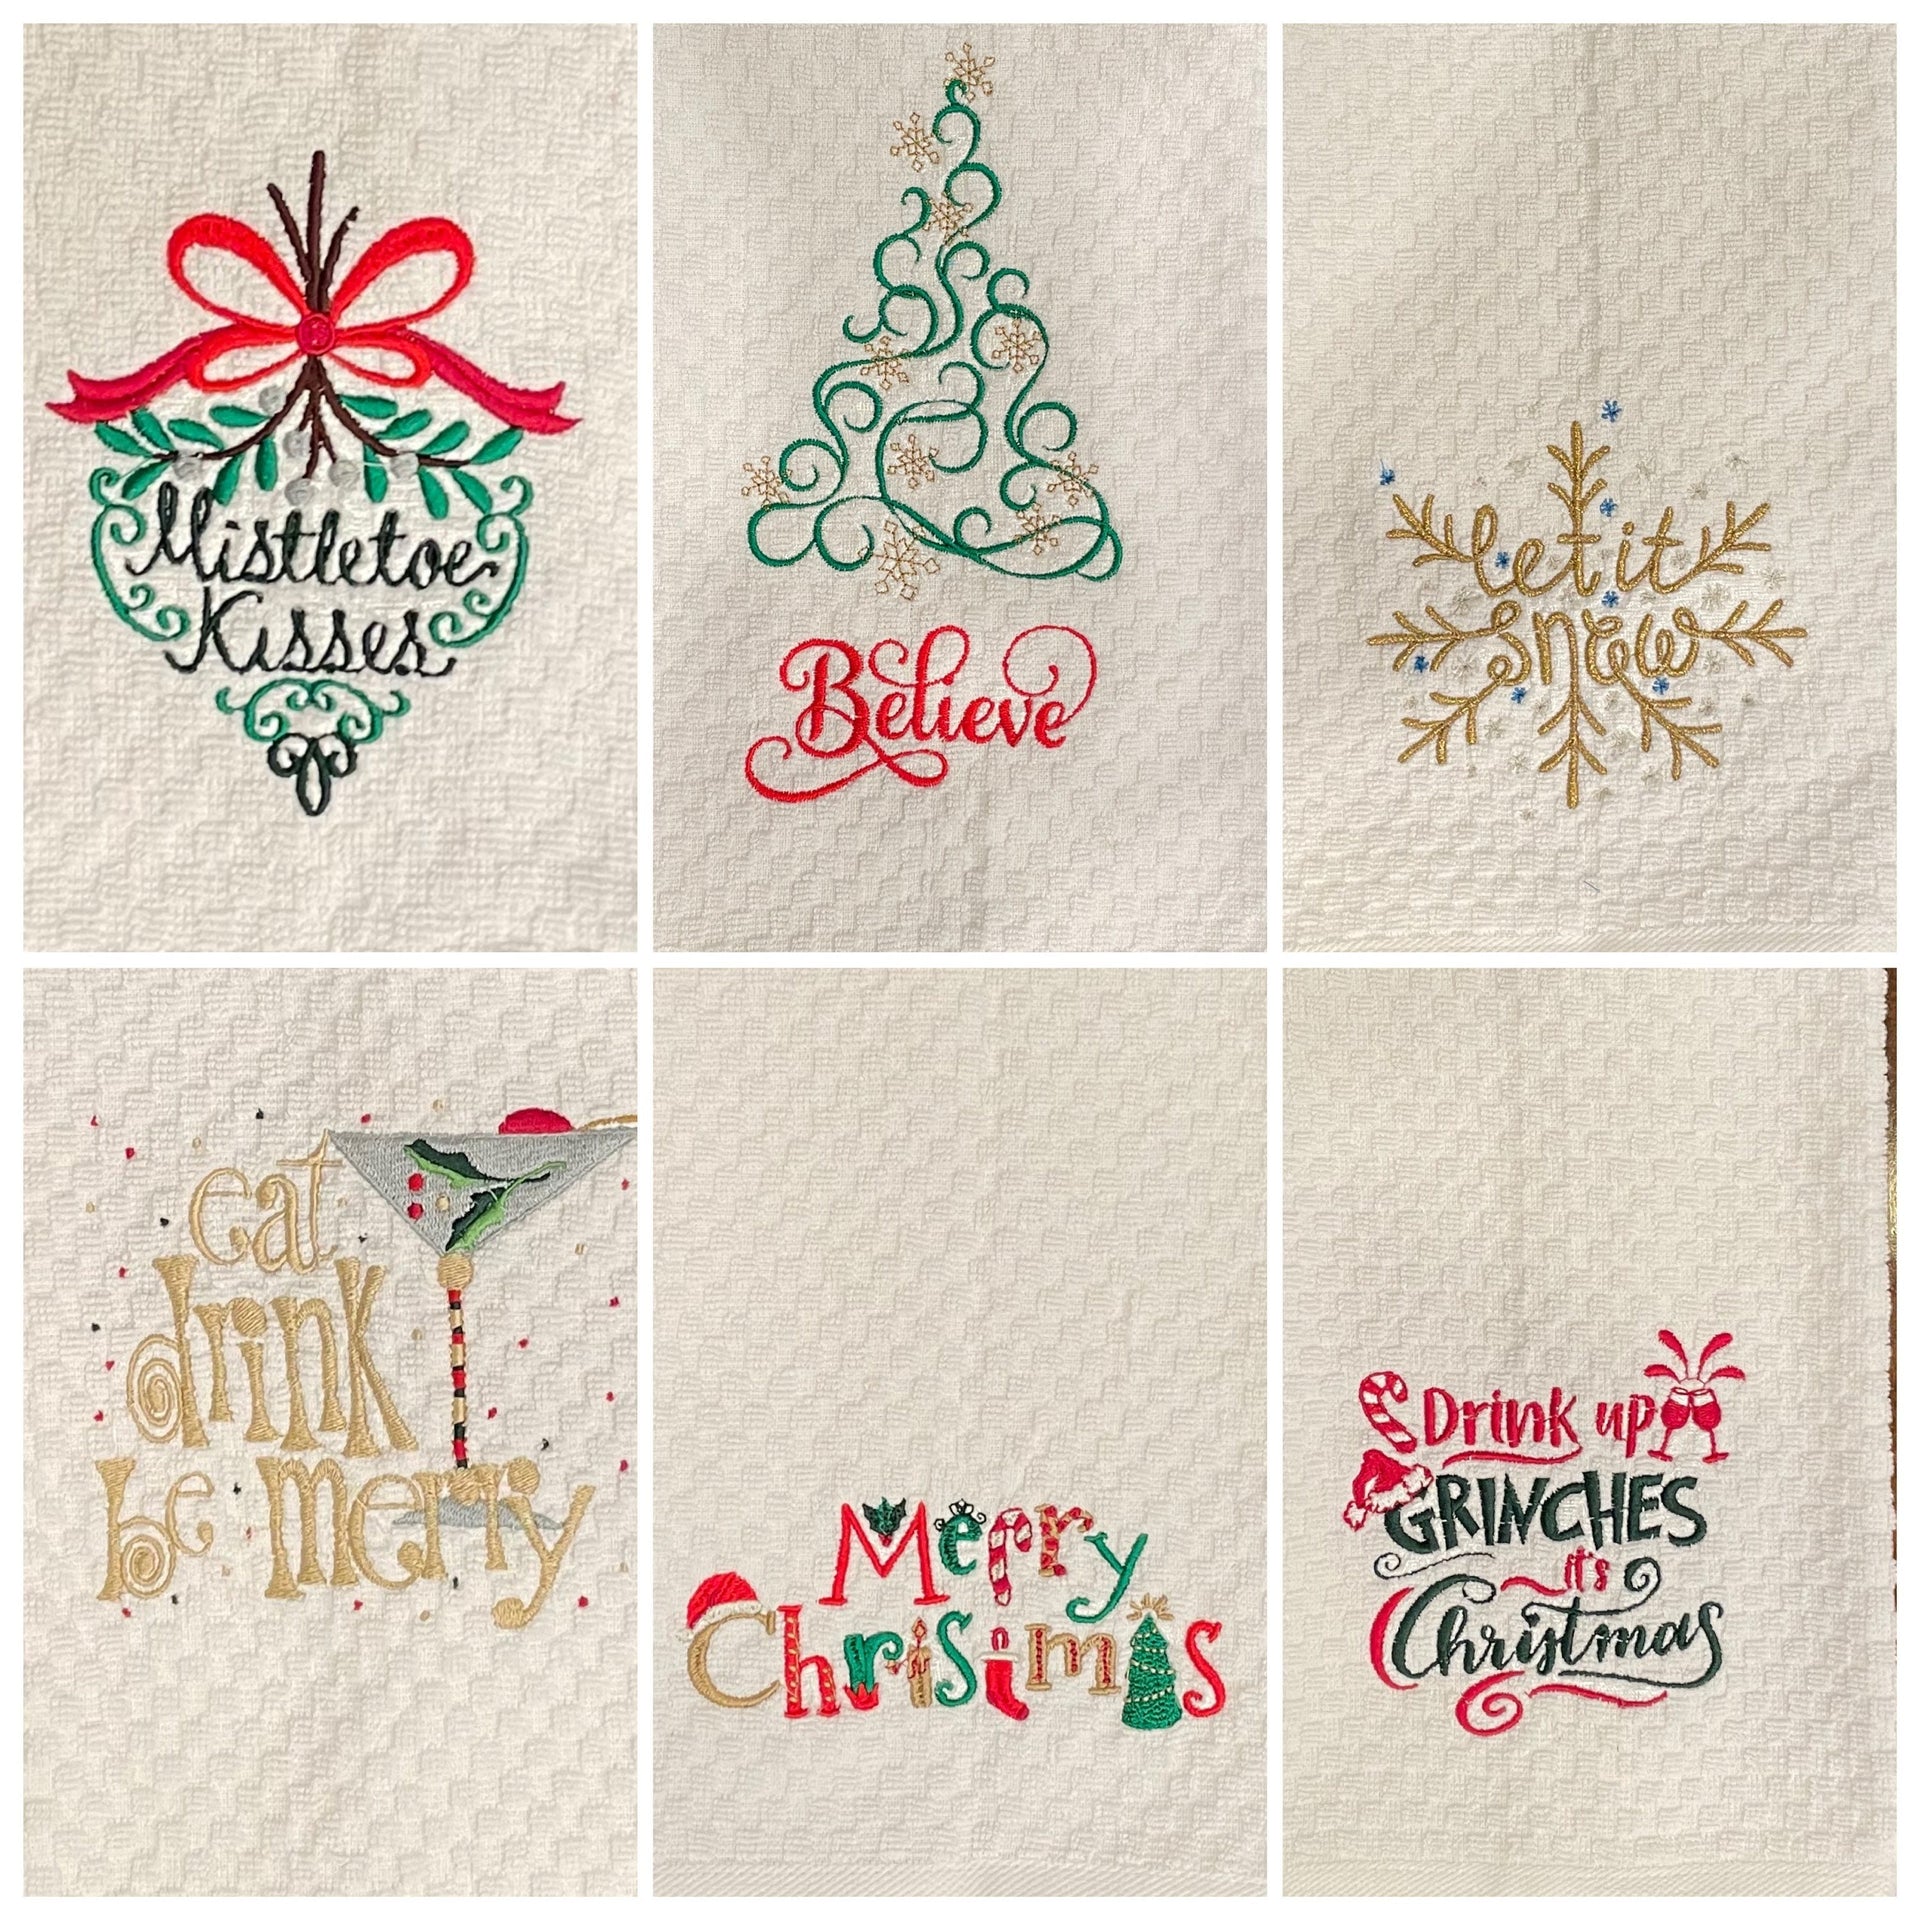 Embroidered Winter Christmas Towels “Oh What Fun” Bath Towels. 100% Plush  Cotton Hand or Fingertip Towel